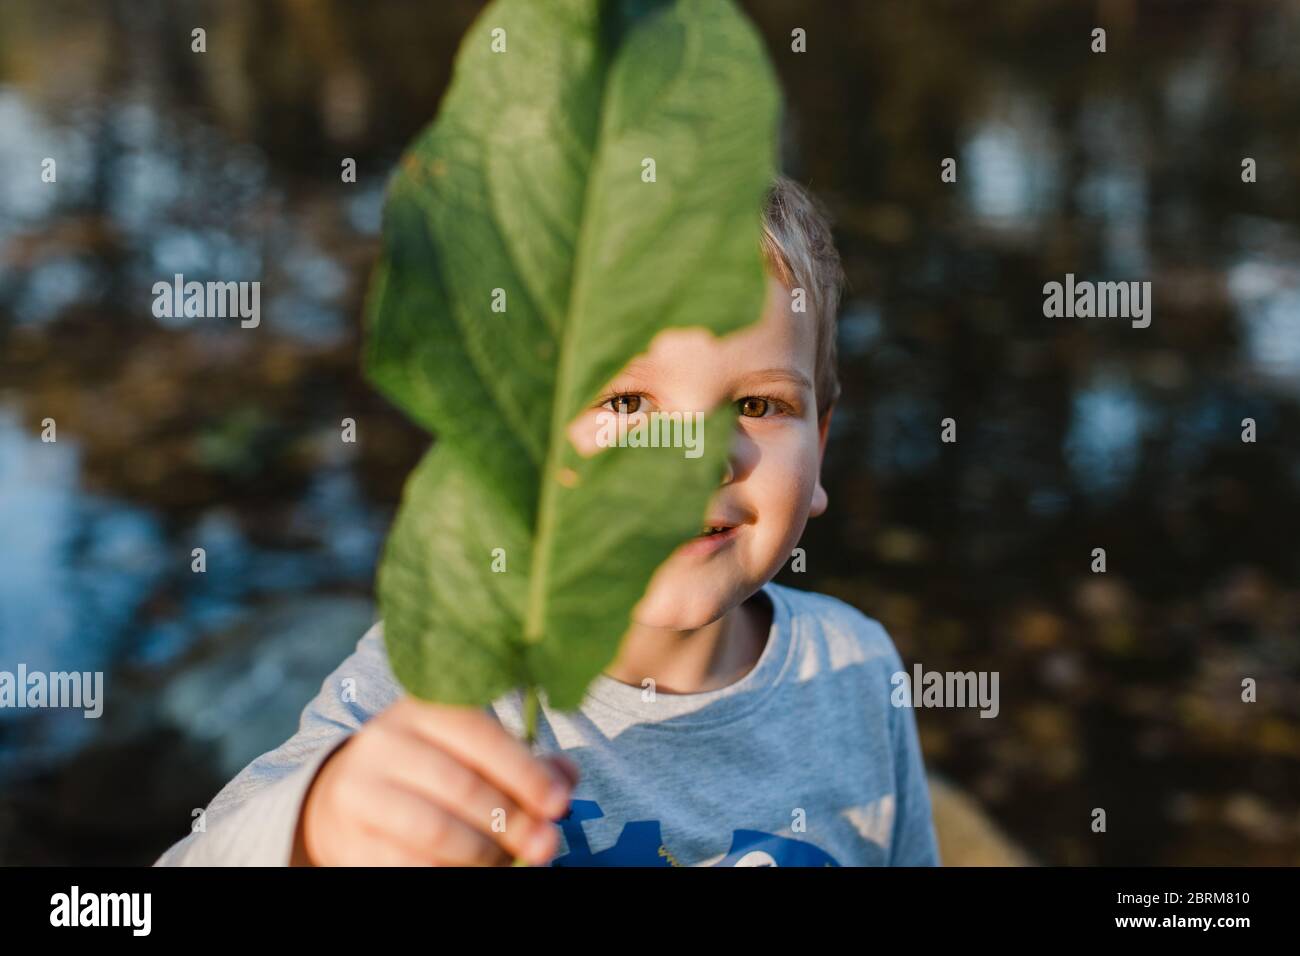 Portrait of young boy holding green leaf. Cute child holding green leaf in front of face and looking at camera. Stock Photo